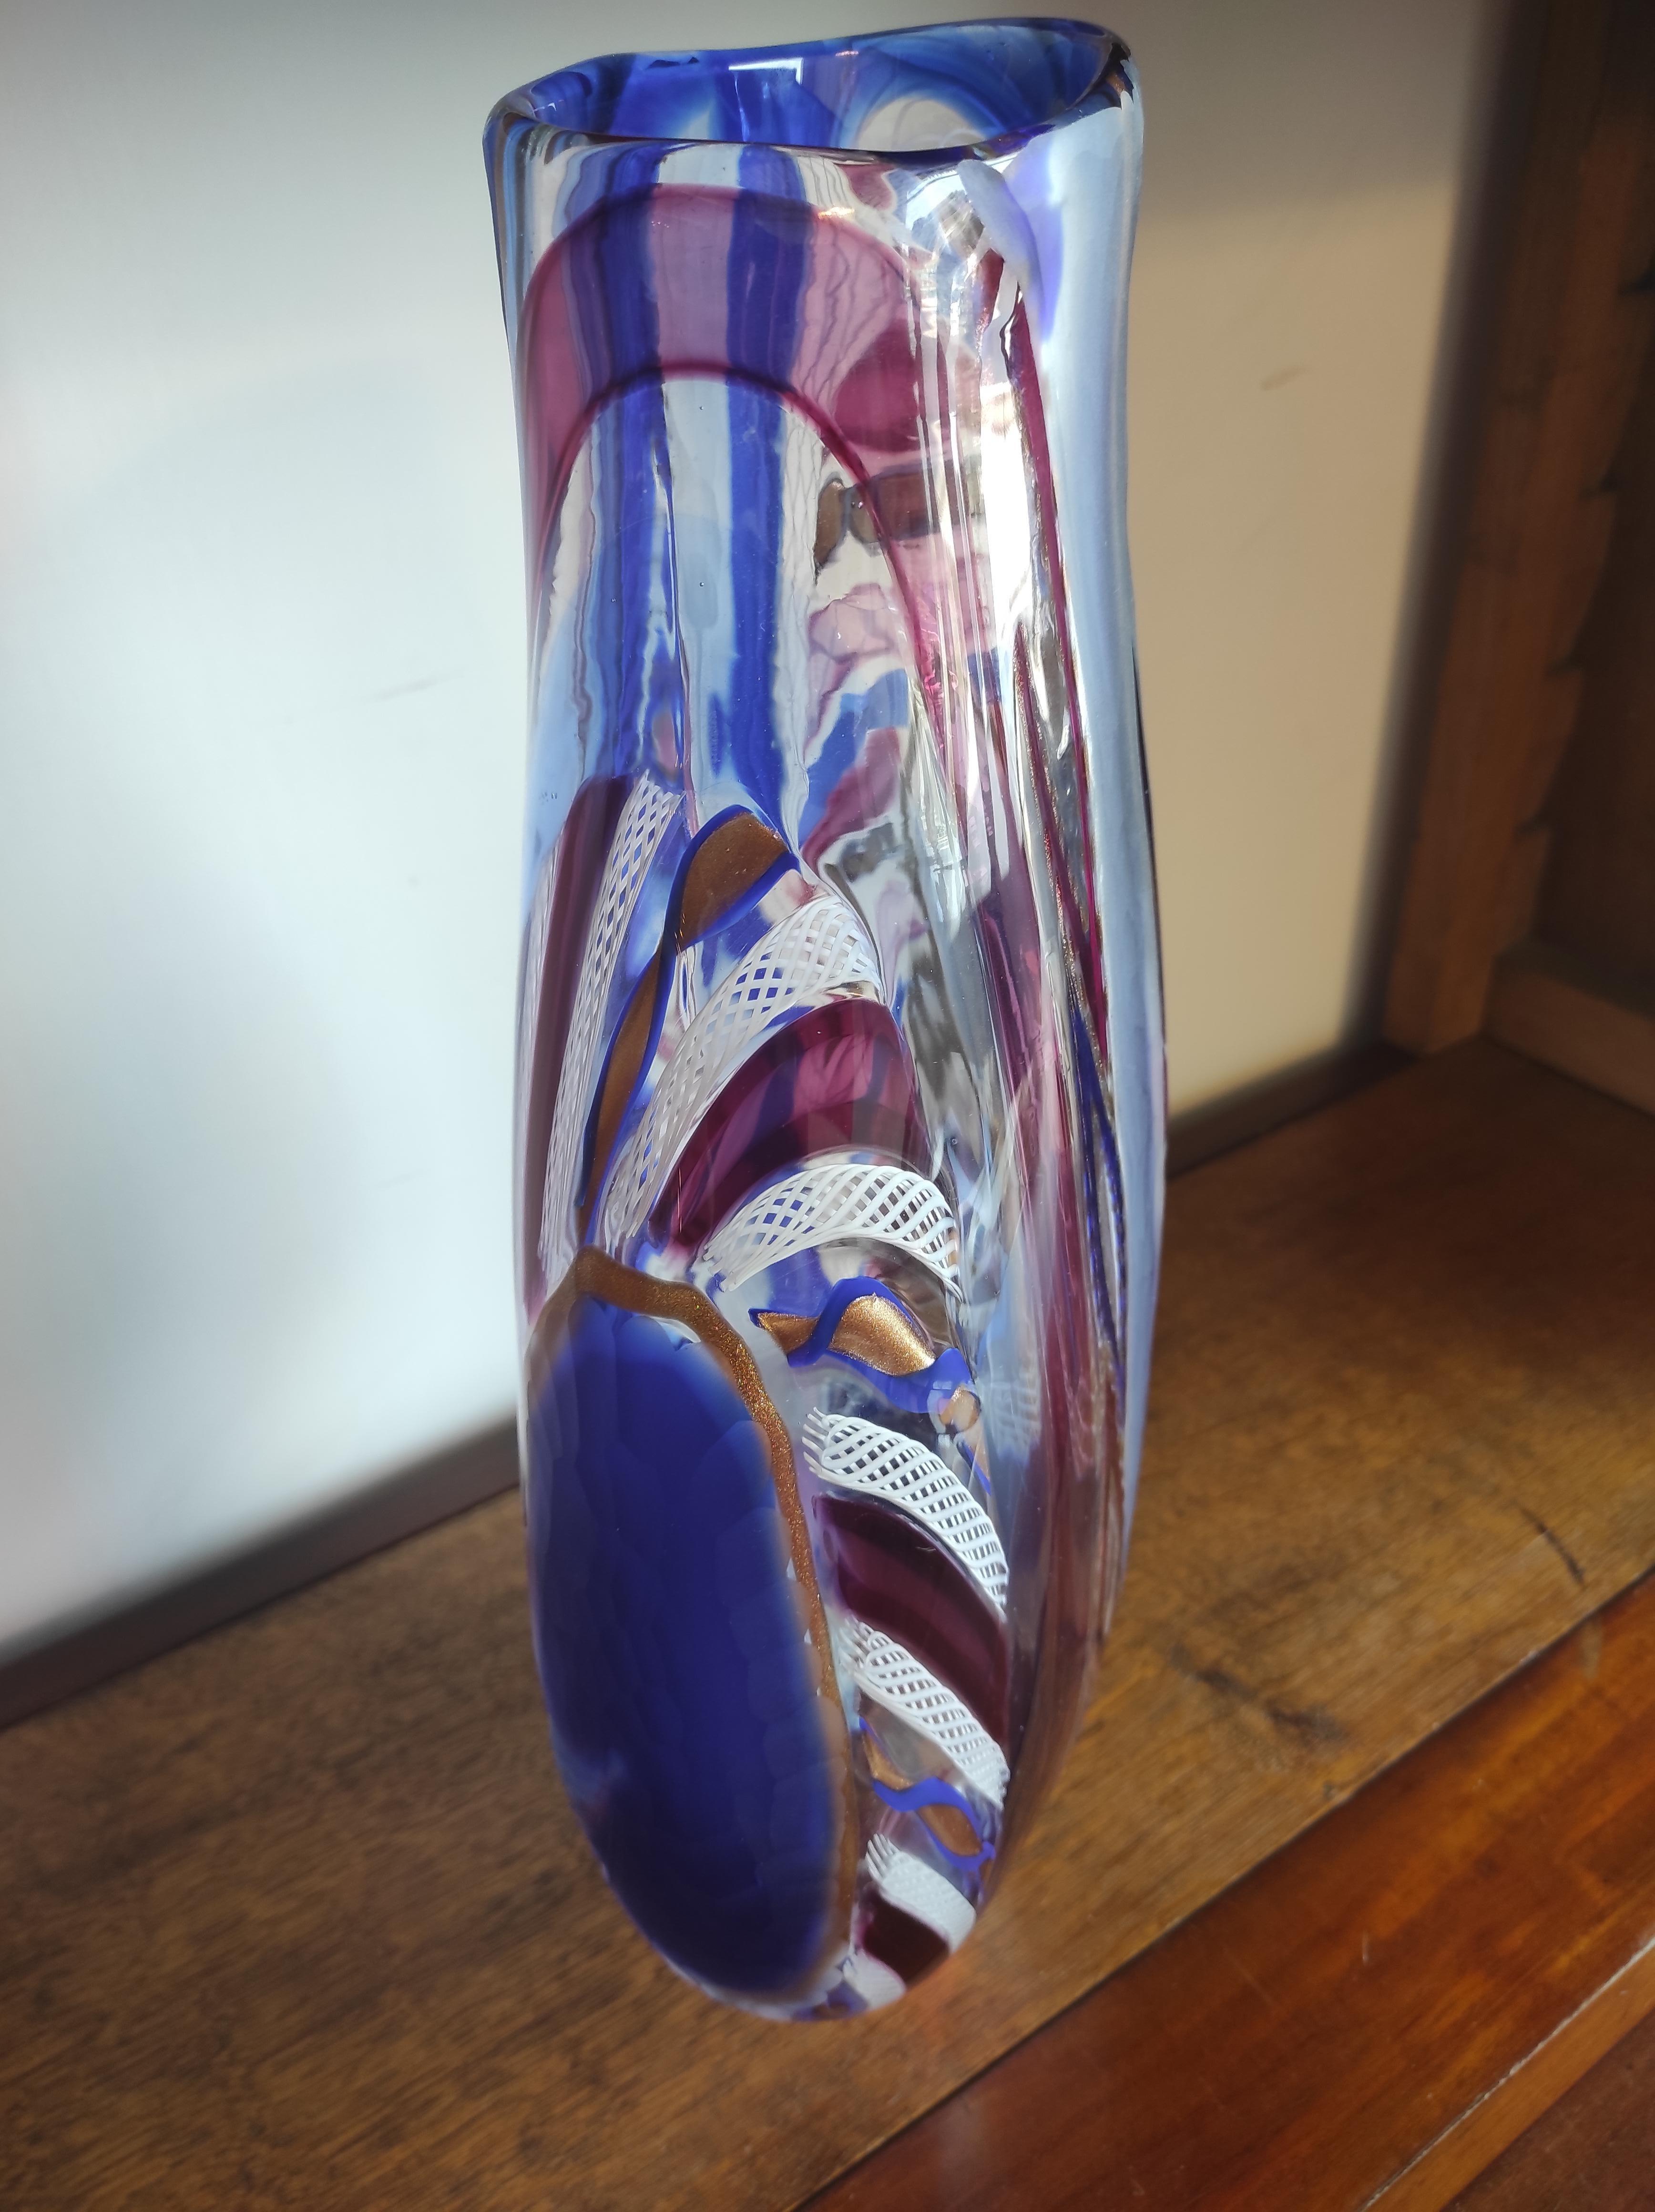 This Murano blown glass vase was created by Vetreria d' Este e Zane of Murano.
Different types of workmanship are present in this vase:
Lattice work: a technique that uses the reeds of  clear glass (glass rods) containing inside straight or